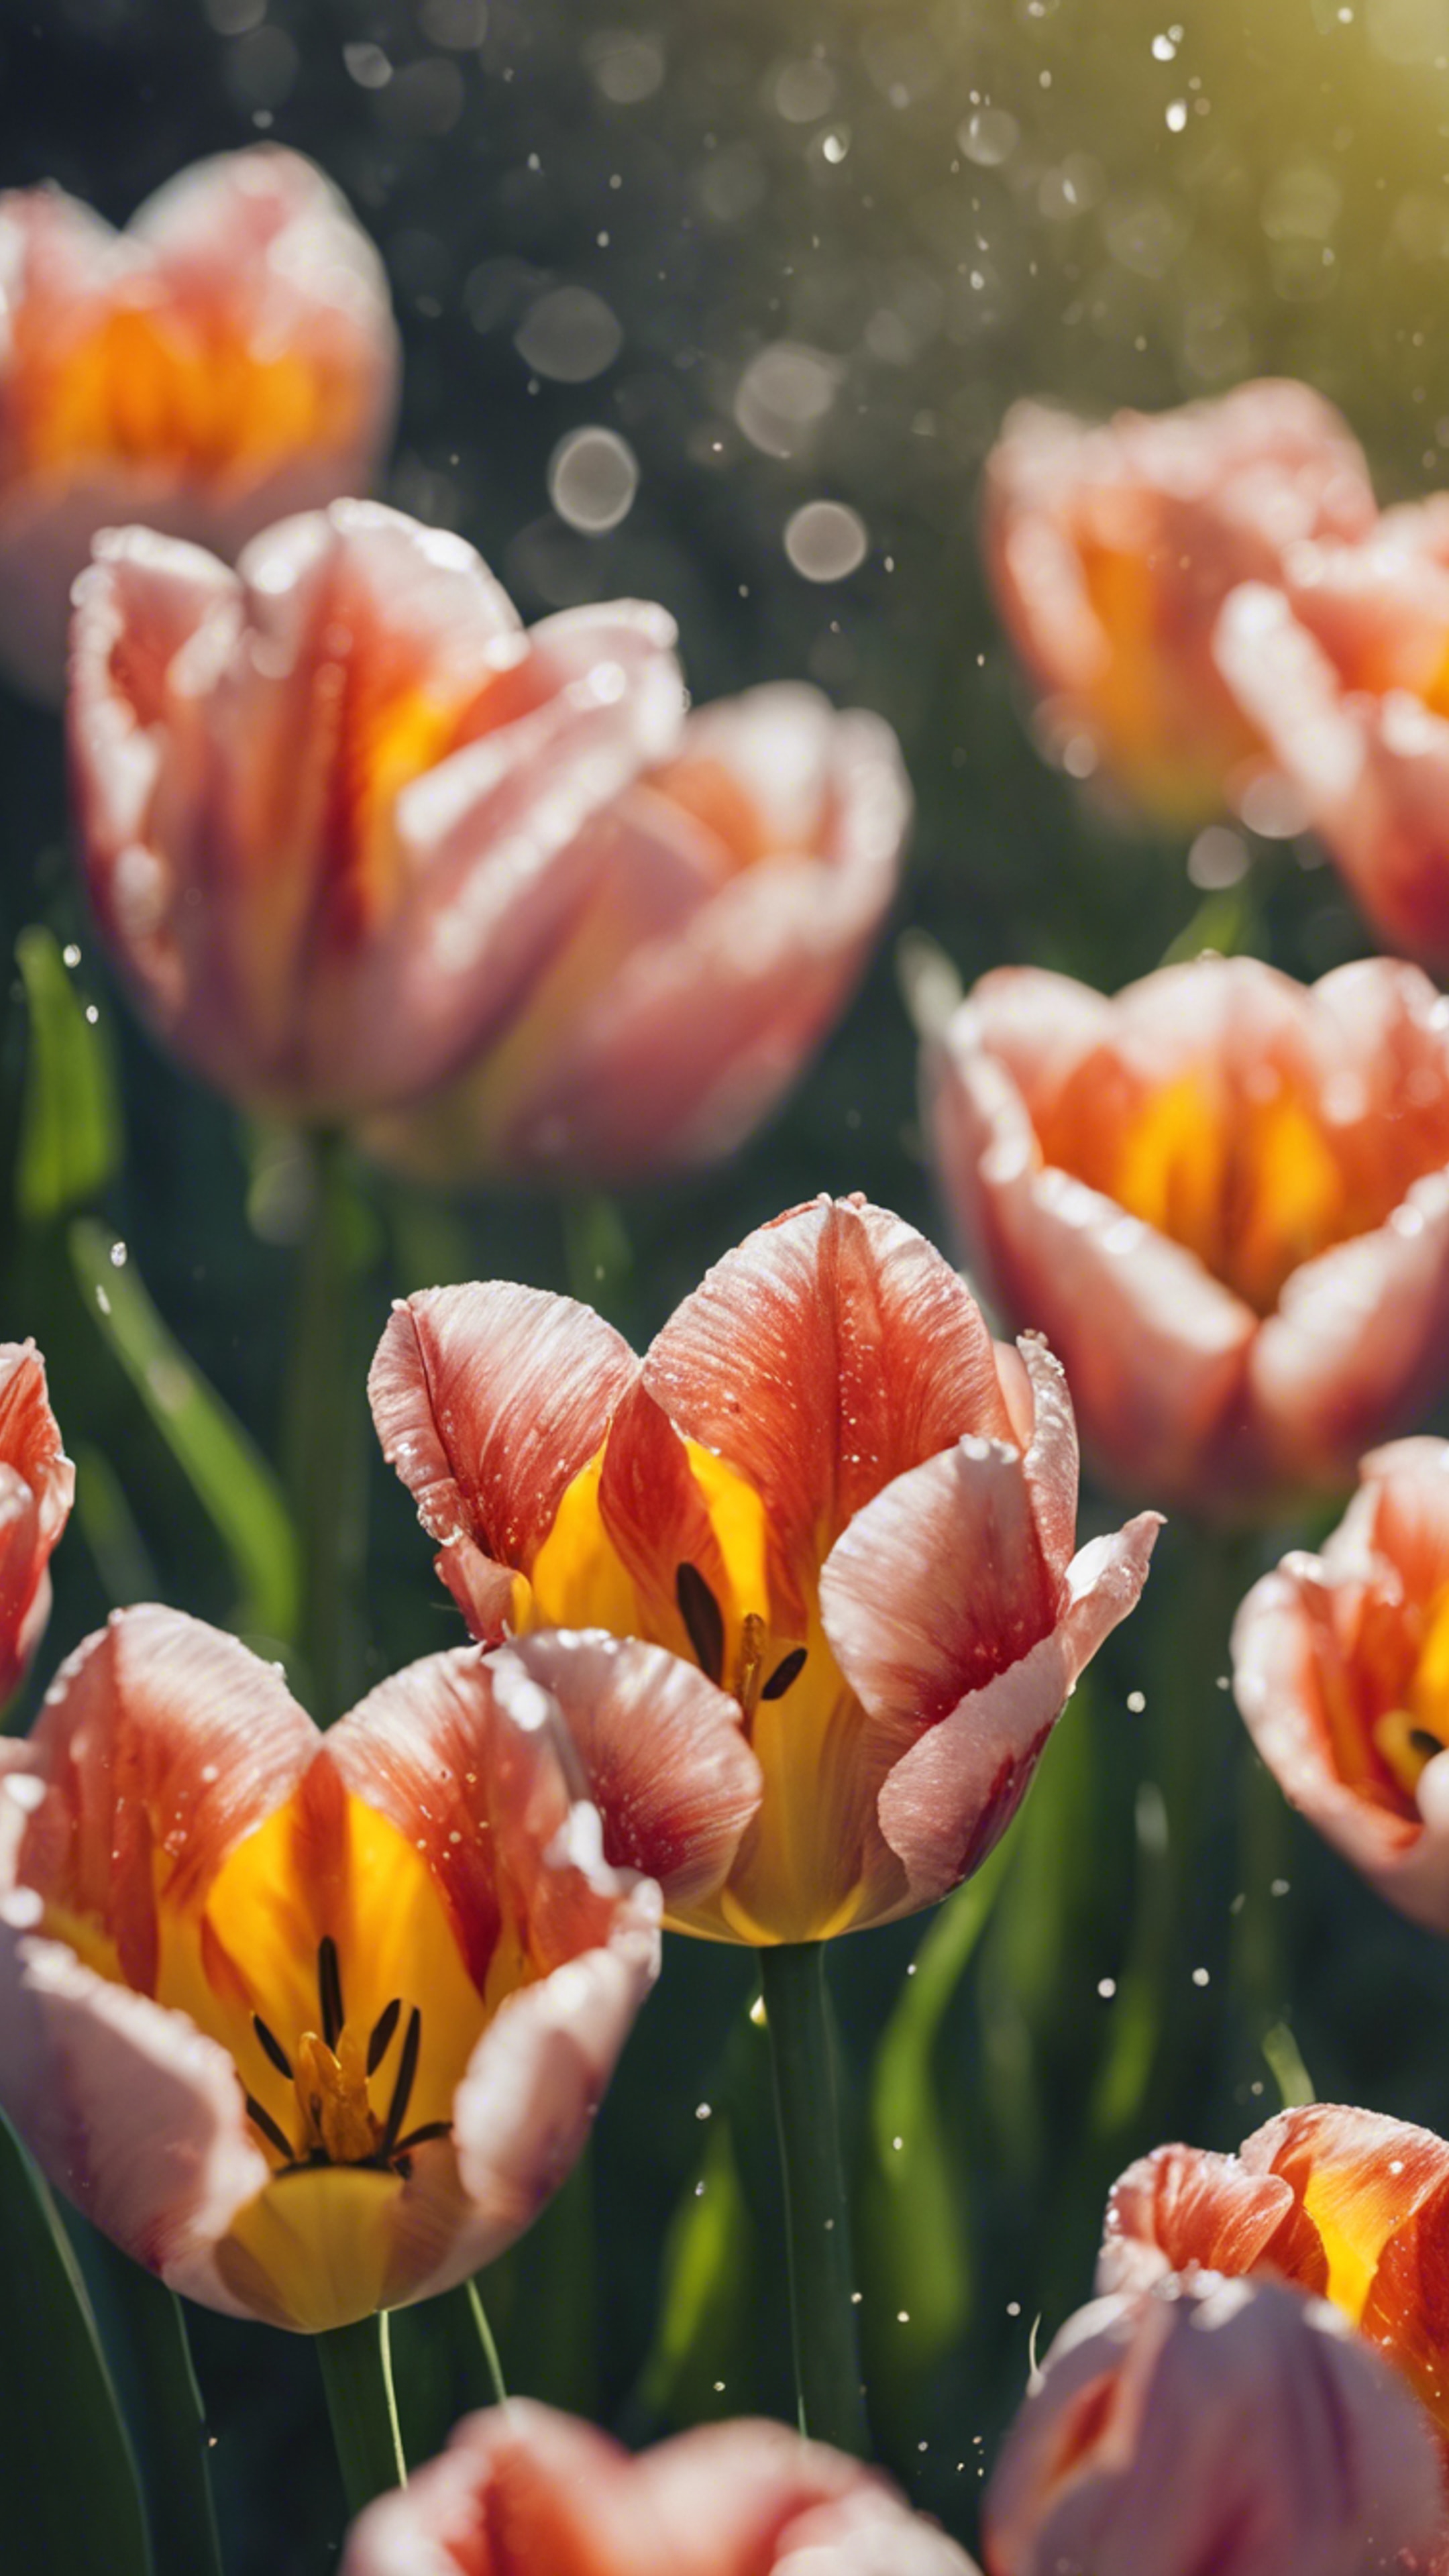 A close-up image of dew-speckled tulip petals opening to the warmth of a mild spring morning. Wallpaper[e13c163b065d4542a7e5]